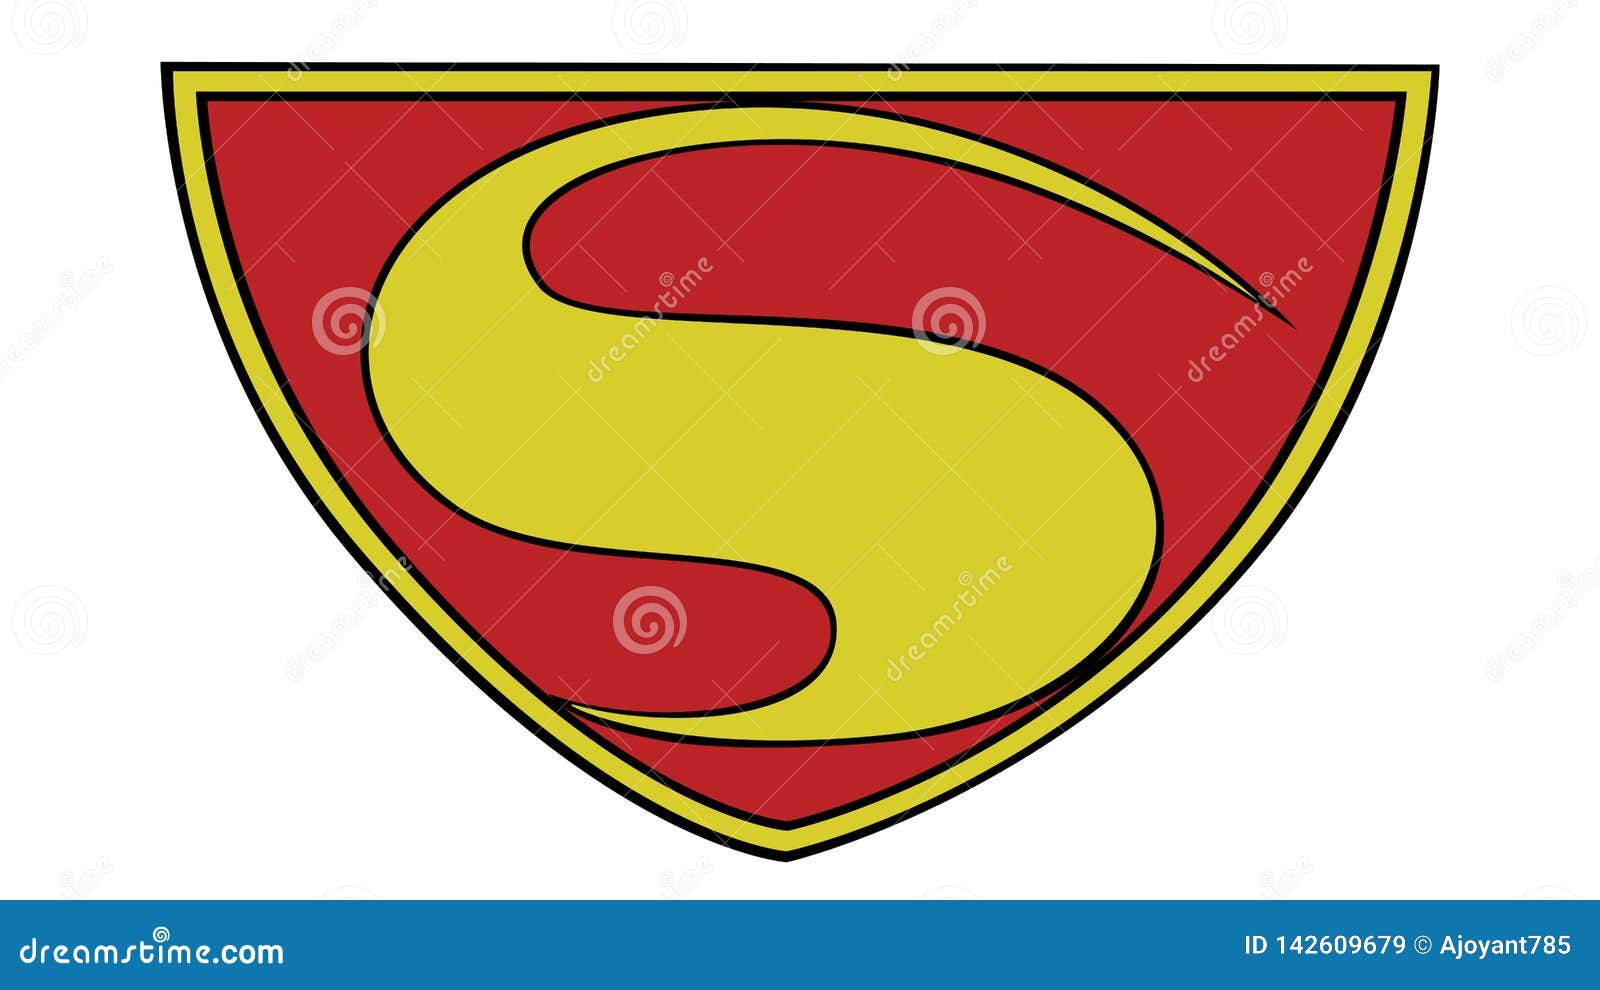 Superman Issue No 7 S Symbol 1940 Editorial Stock Image - Illustration of  appearance, krypto: 142609679